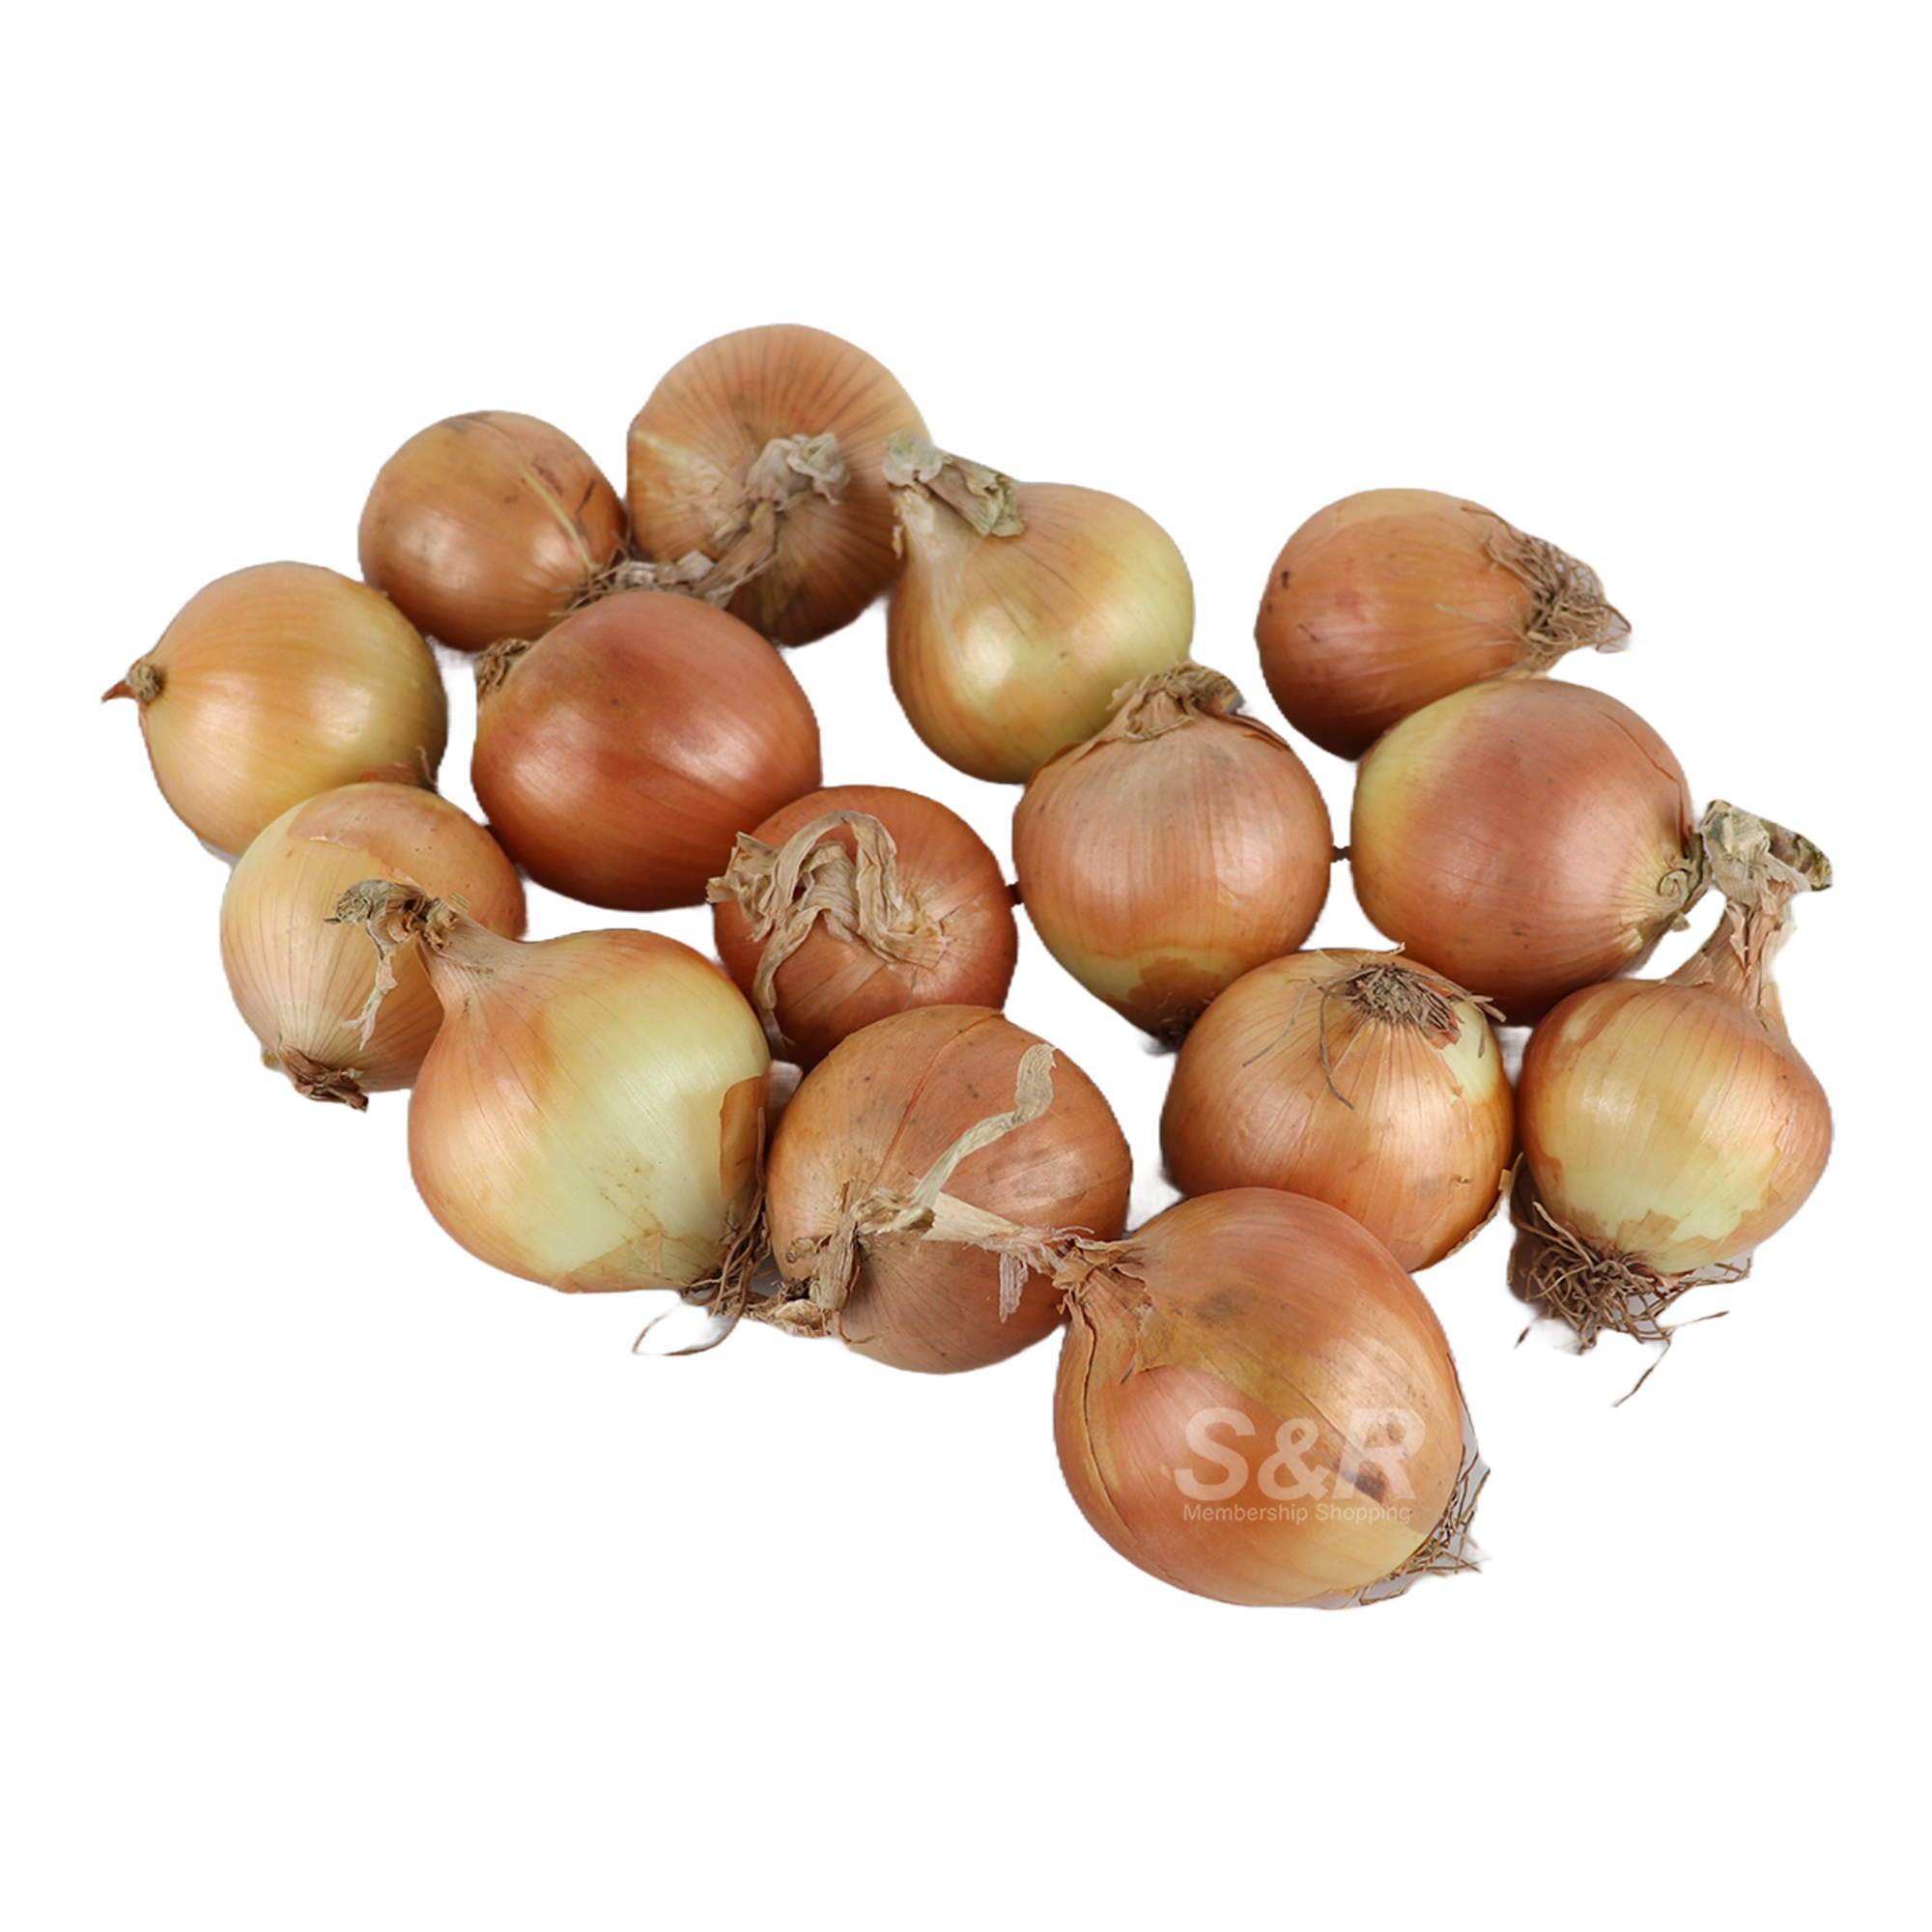 MFC White Onion approx. 1.5kg